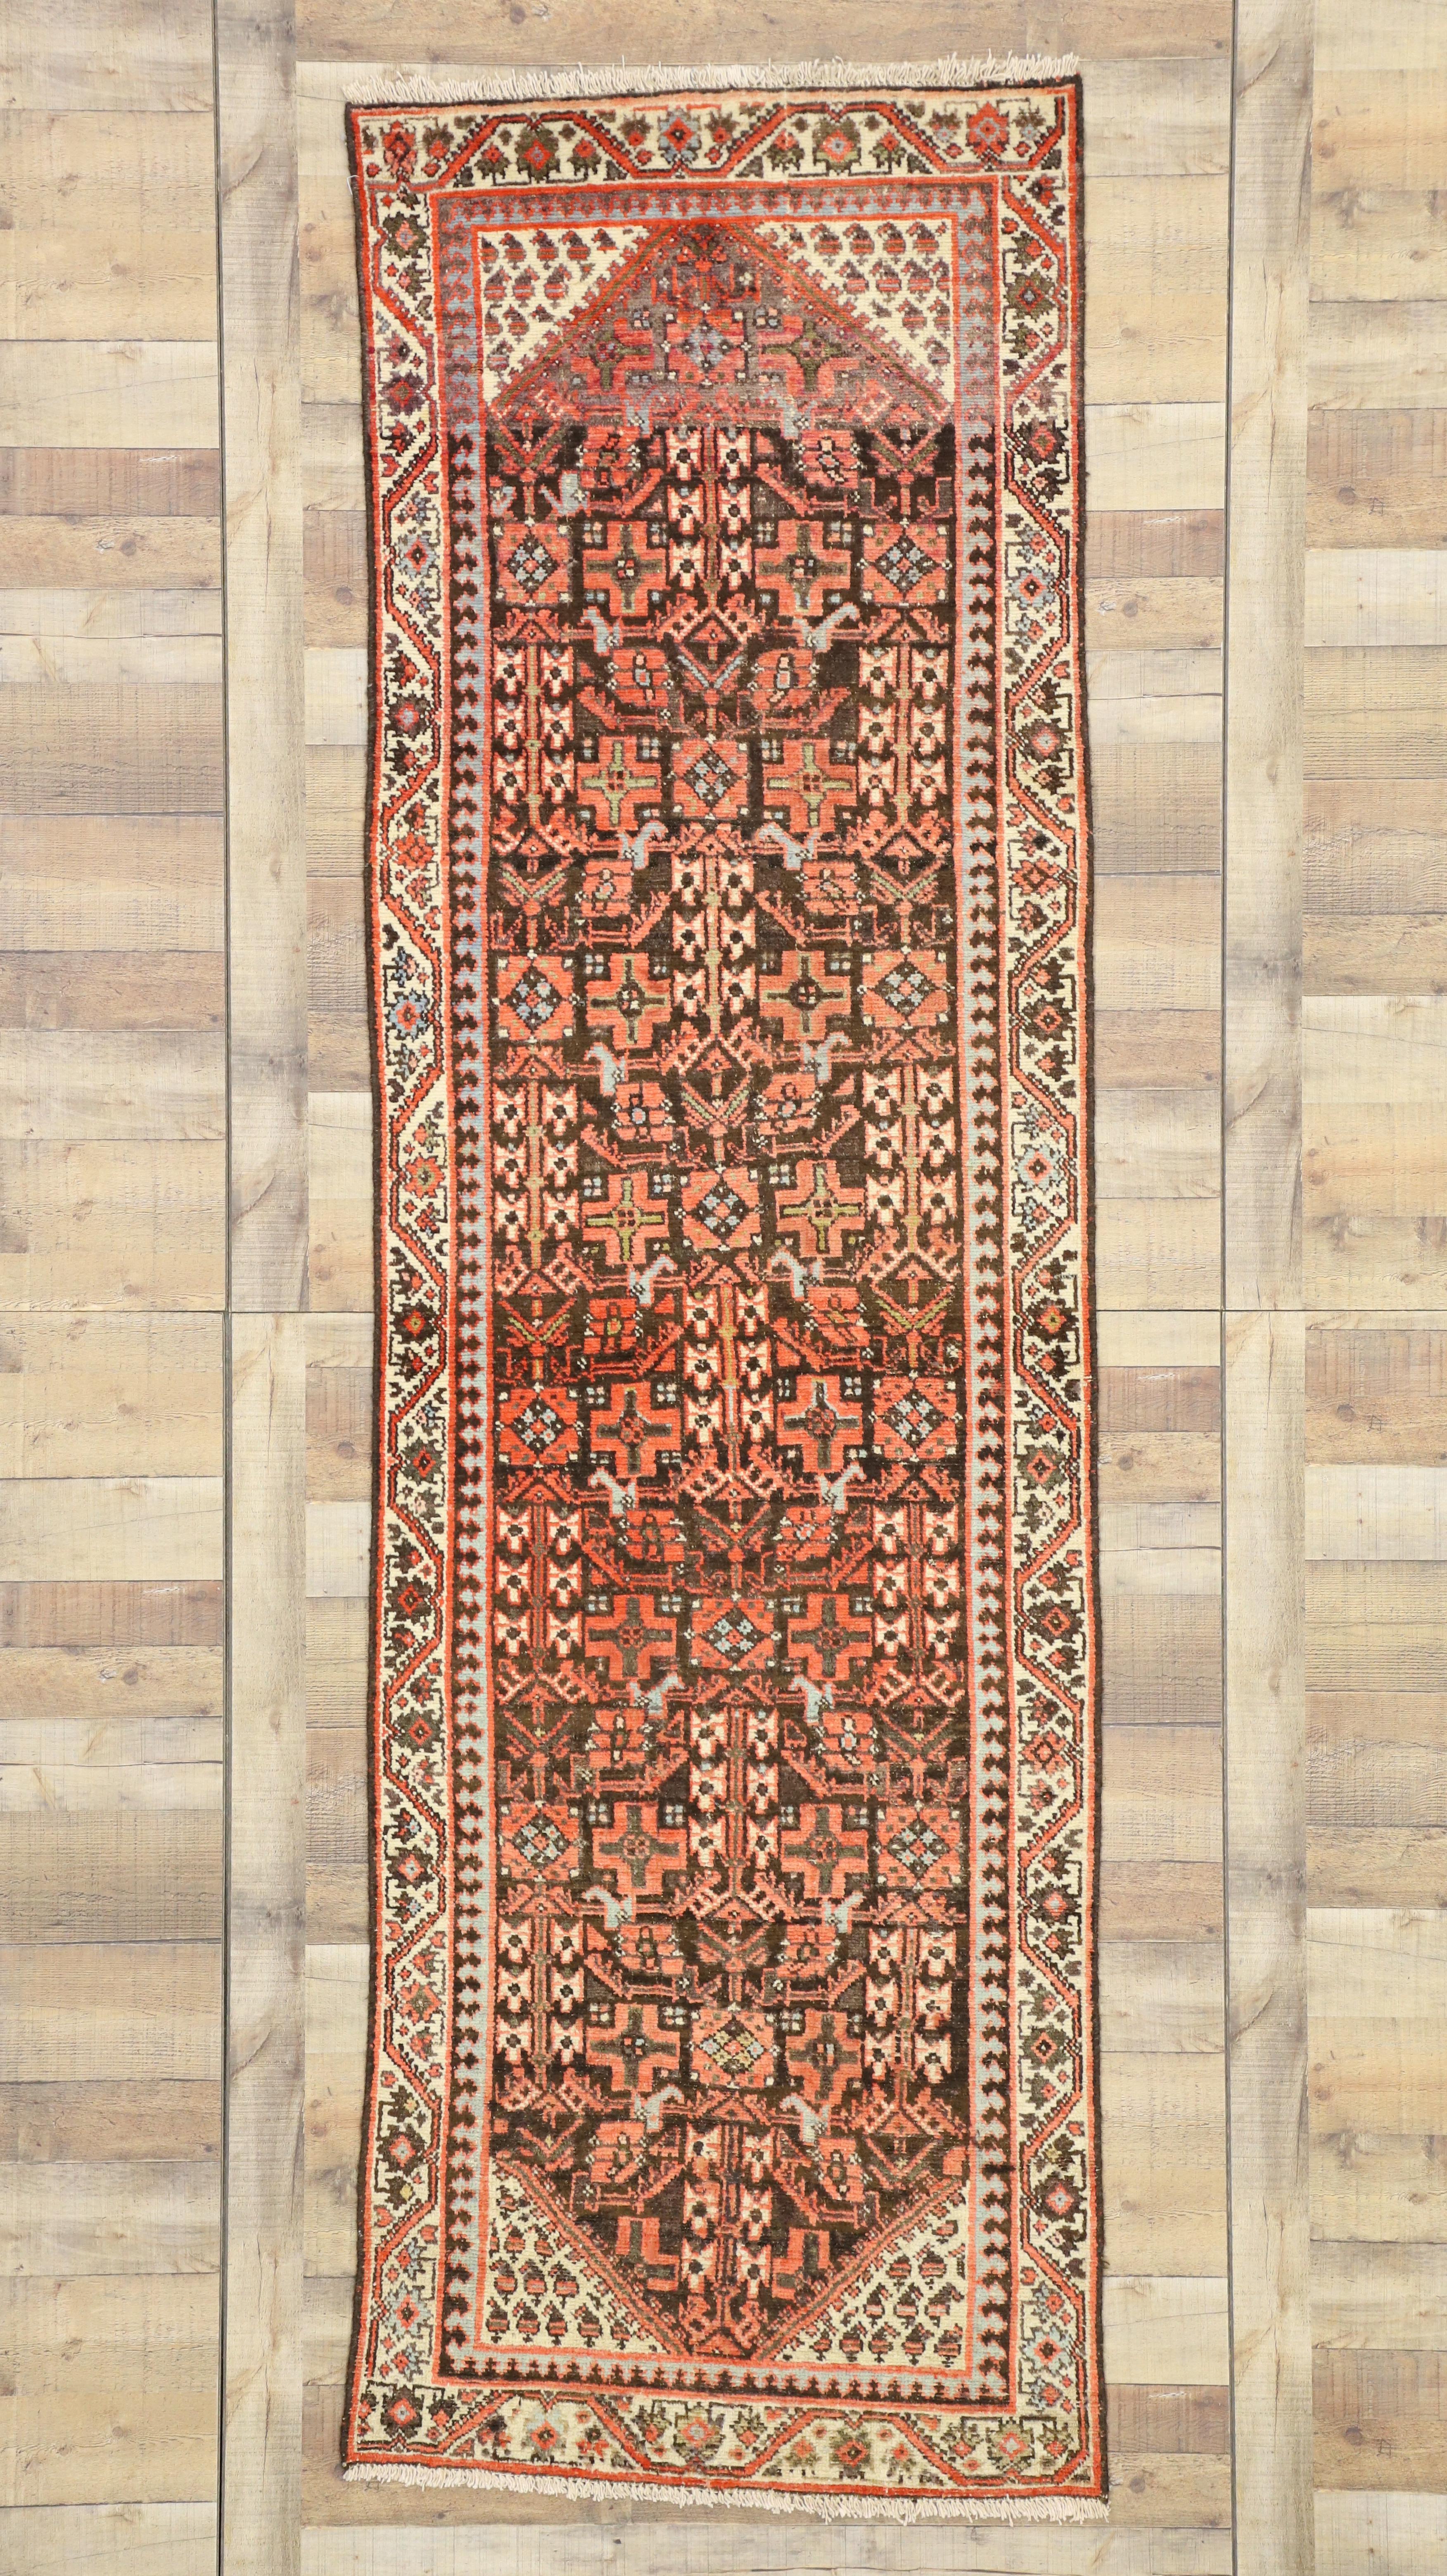 75214, Antique Persian Malayer Rug Runner 02'11 x 09'06. This hand-knotted wool antique Persian Malayer runner features an all-over geometric pattern composed of Guli Henna which is the Flower of Hinnai also known as Guli Hinnai; a central stem